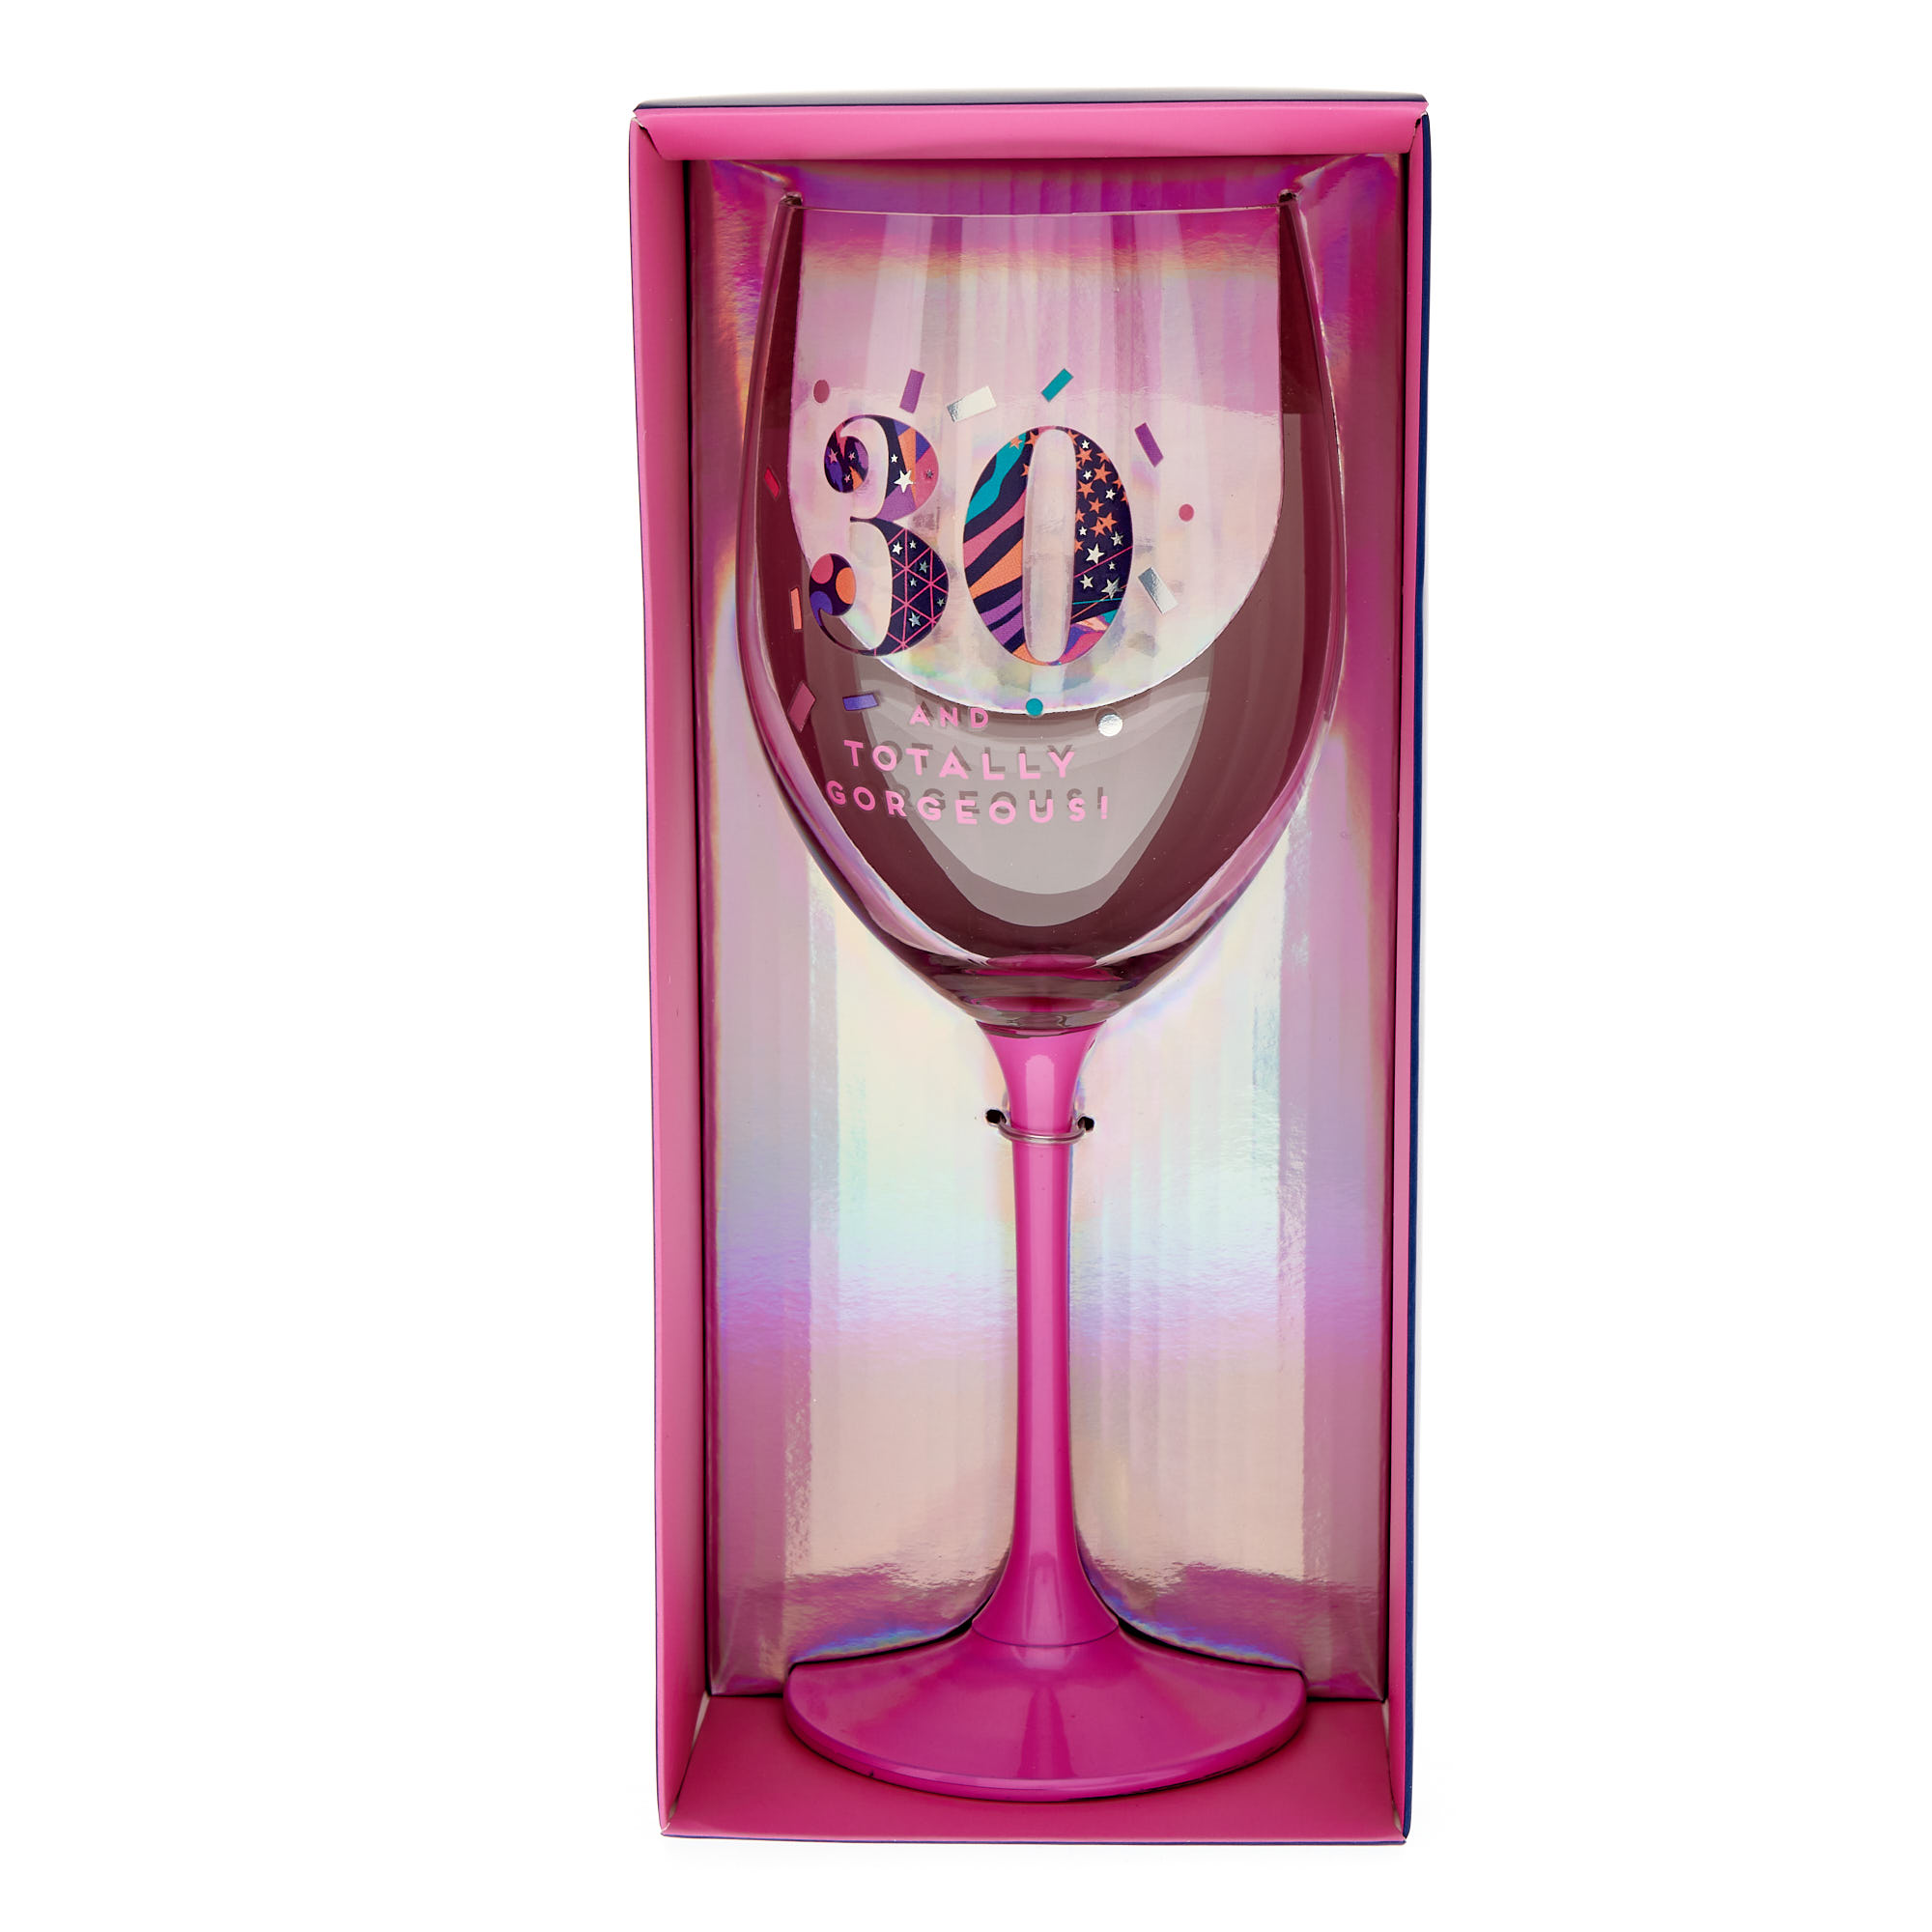 30 & Totally Gorgeous Wine Glass